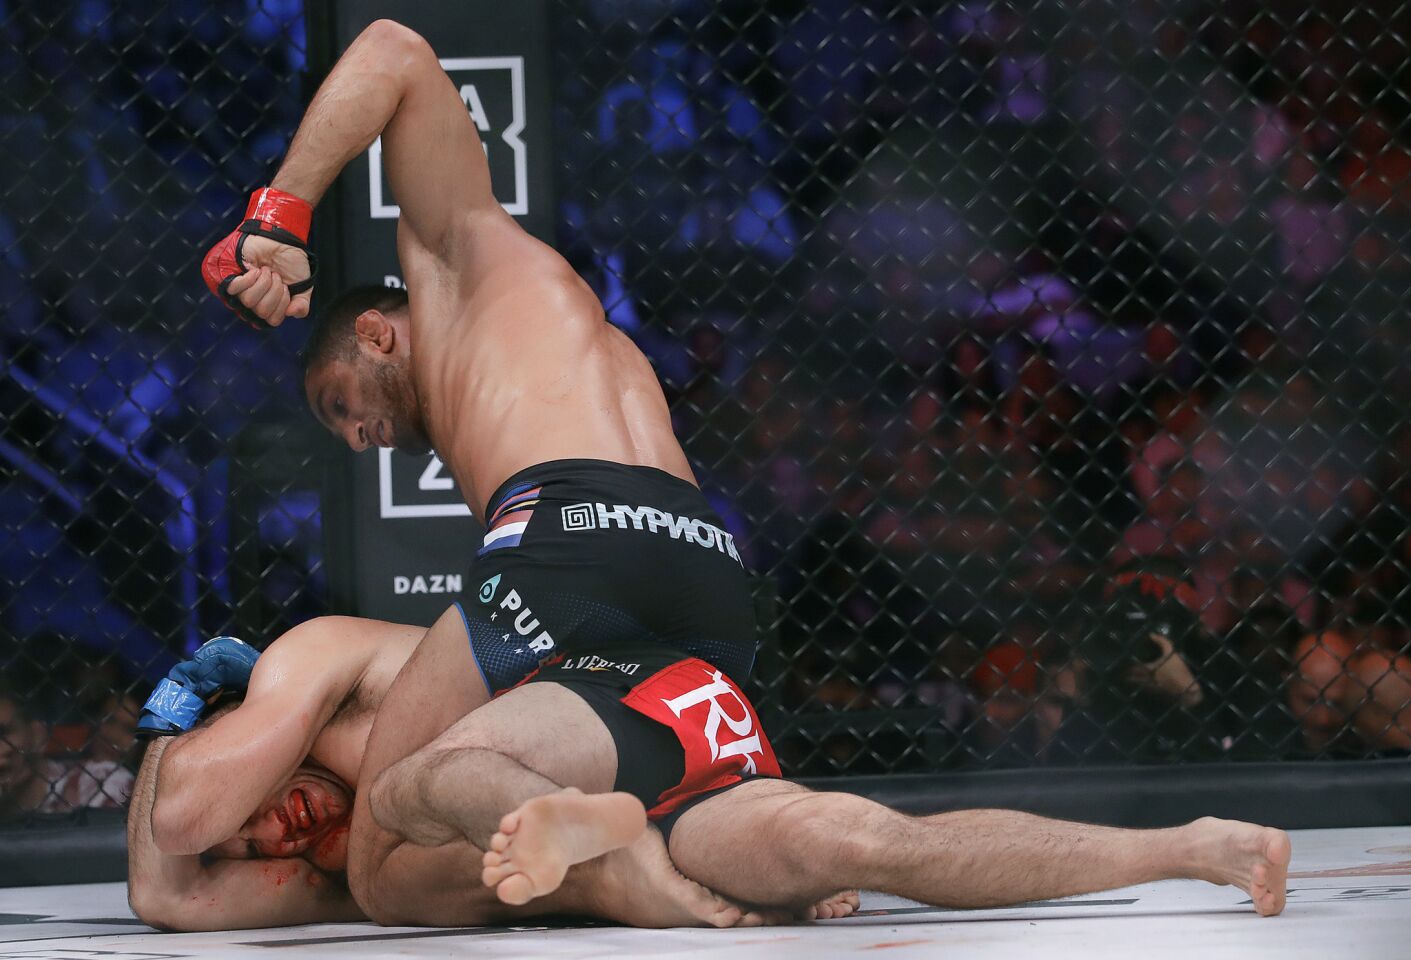 Gegard Mousasi, top, punches Rory MacDonald during a middleweight world title mixed martial arts bout at Bellator 206 in San Jose, Calif., Saturday, Sept. 29, 2018. Mousasi won by technical knockout in the second round to retain the title. (AP Photo/Jeff Chiu)